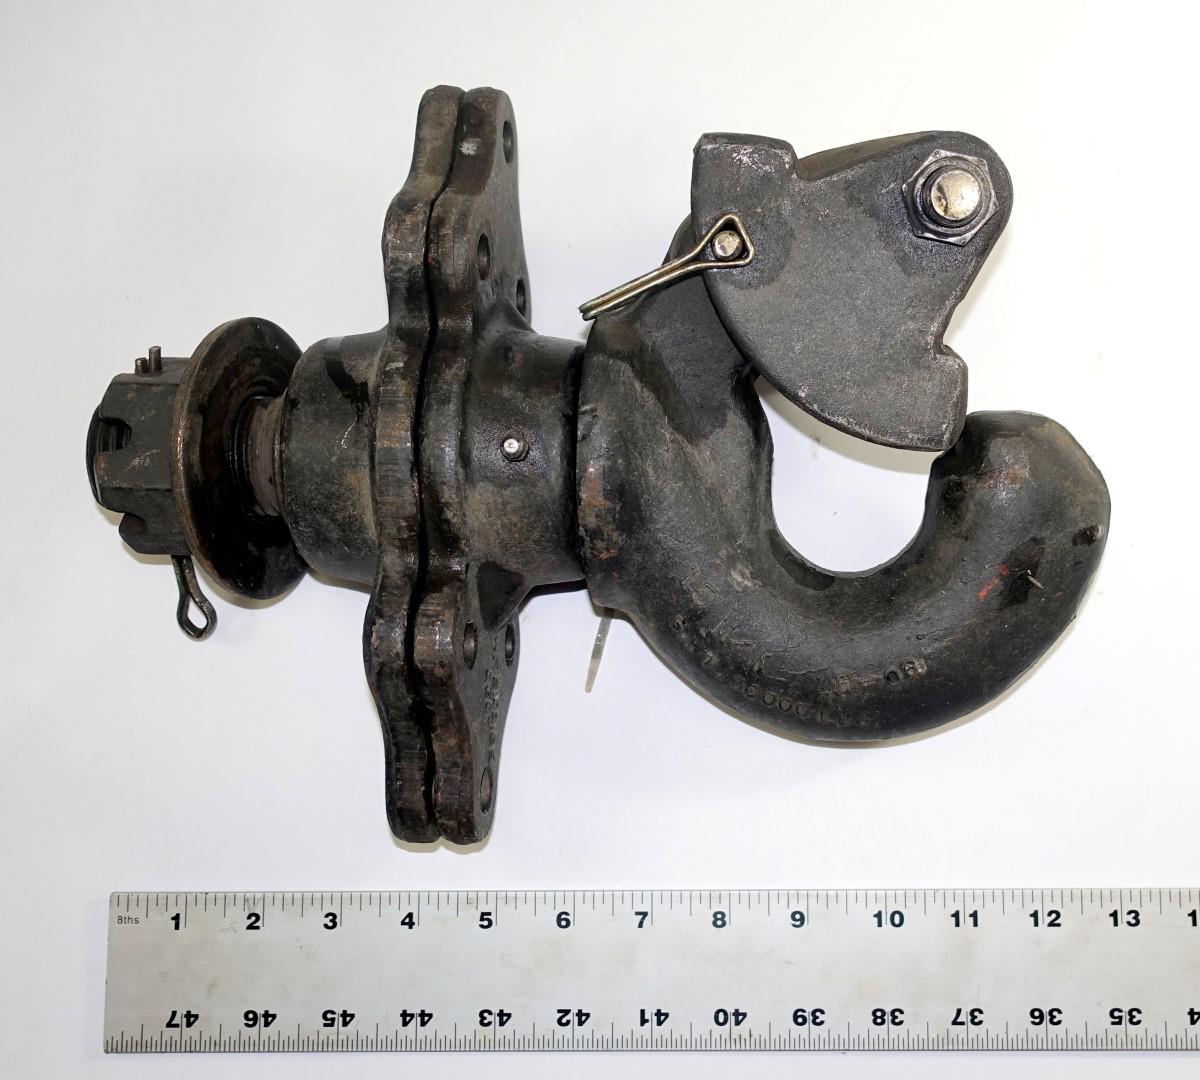 SP-1964 | SP-1964 Wallace Forge 15 Ton Swivel Mounted Pintle Hook for Commercial Trucks NOS (1).JPG